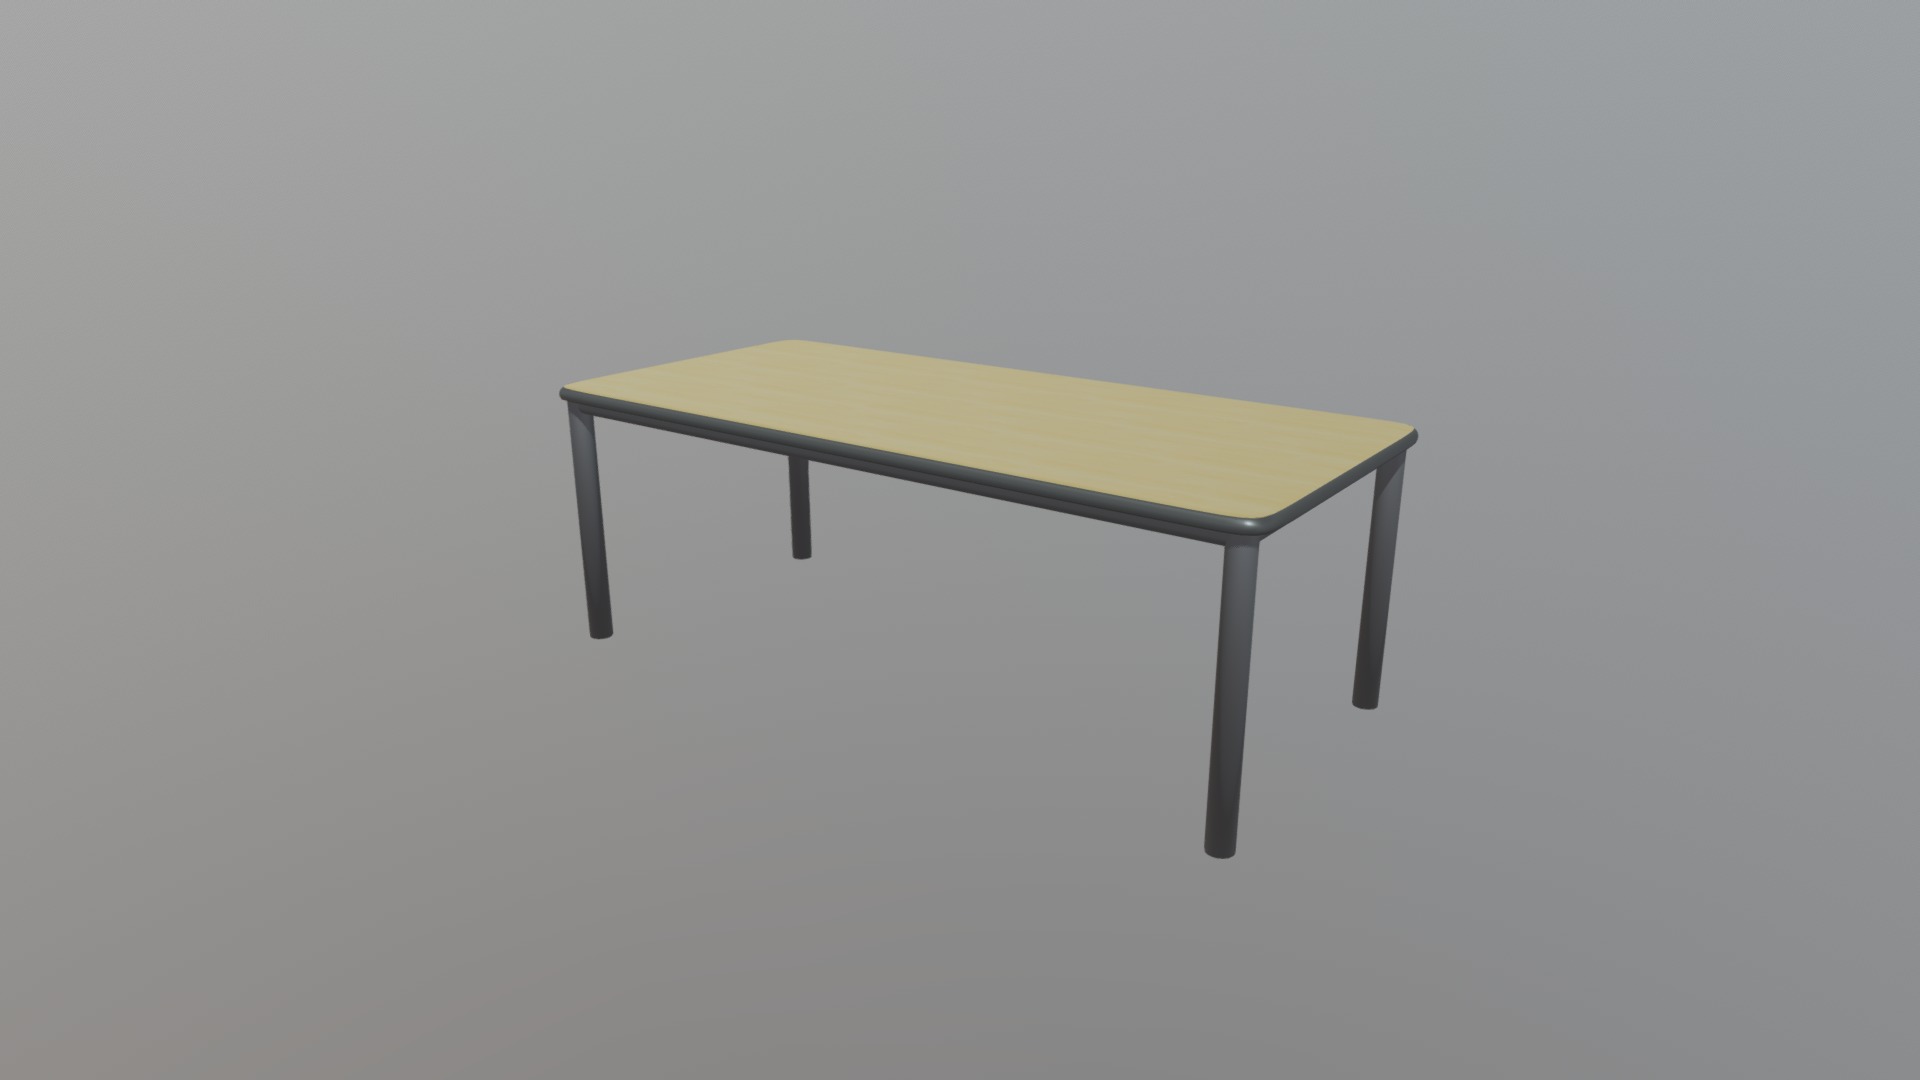 3D model School Classroom Student Desk - This is a 3D model of the School Classroom Student Desk. The 3D model is about a table with a table top.